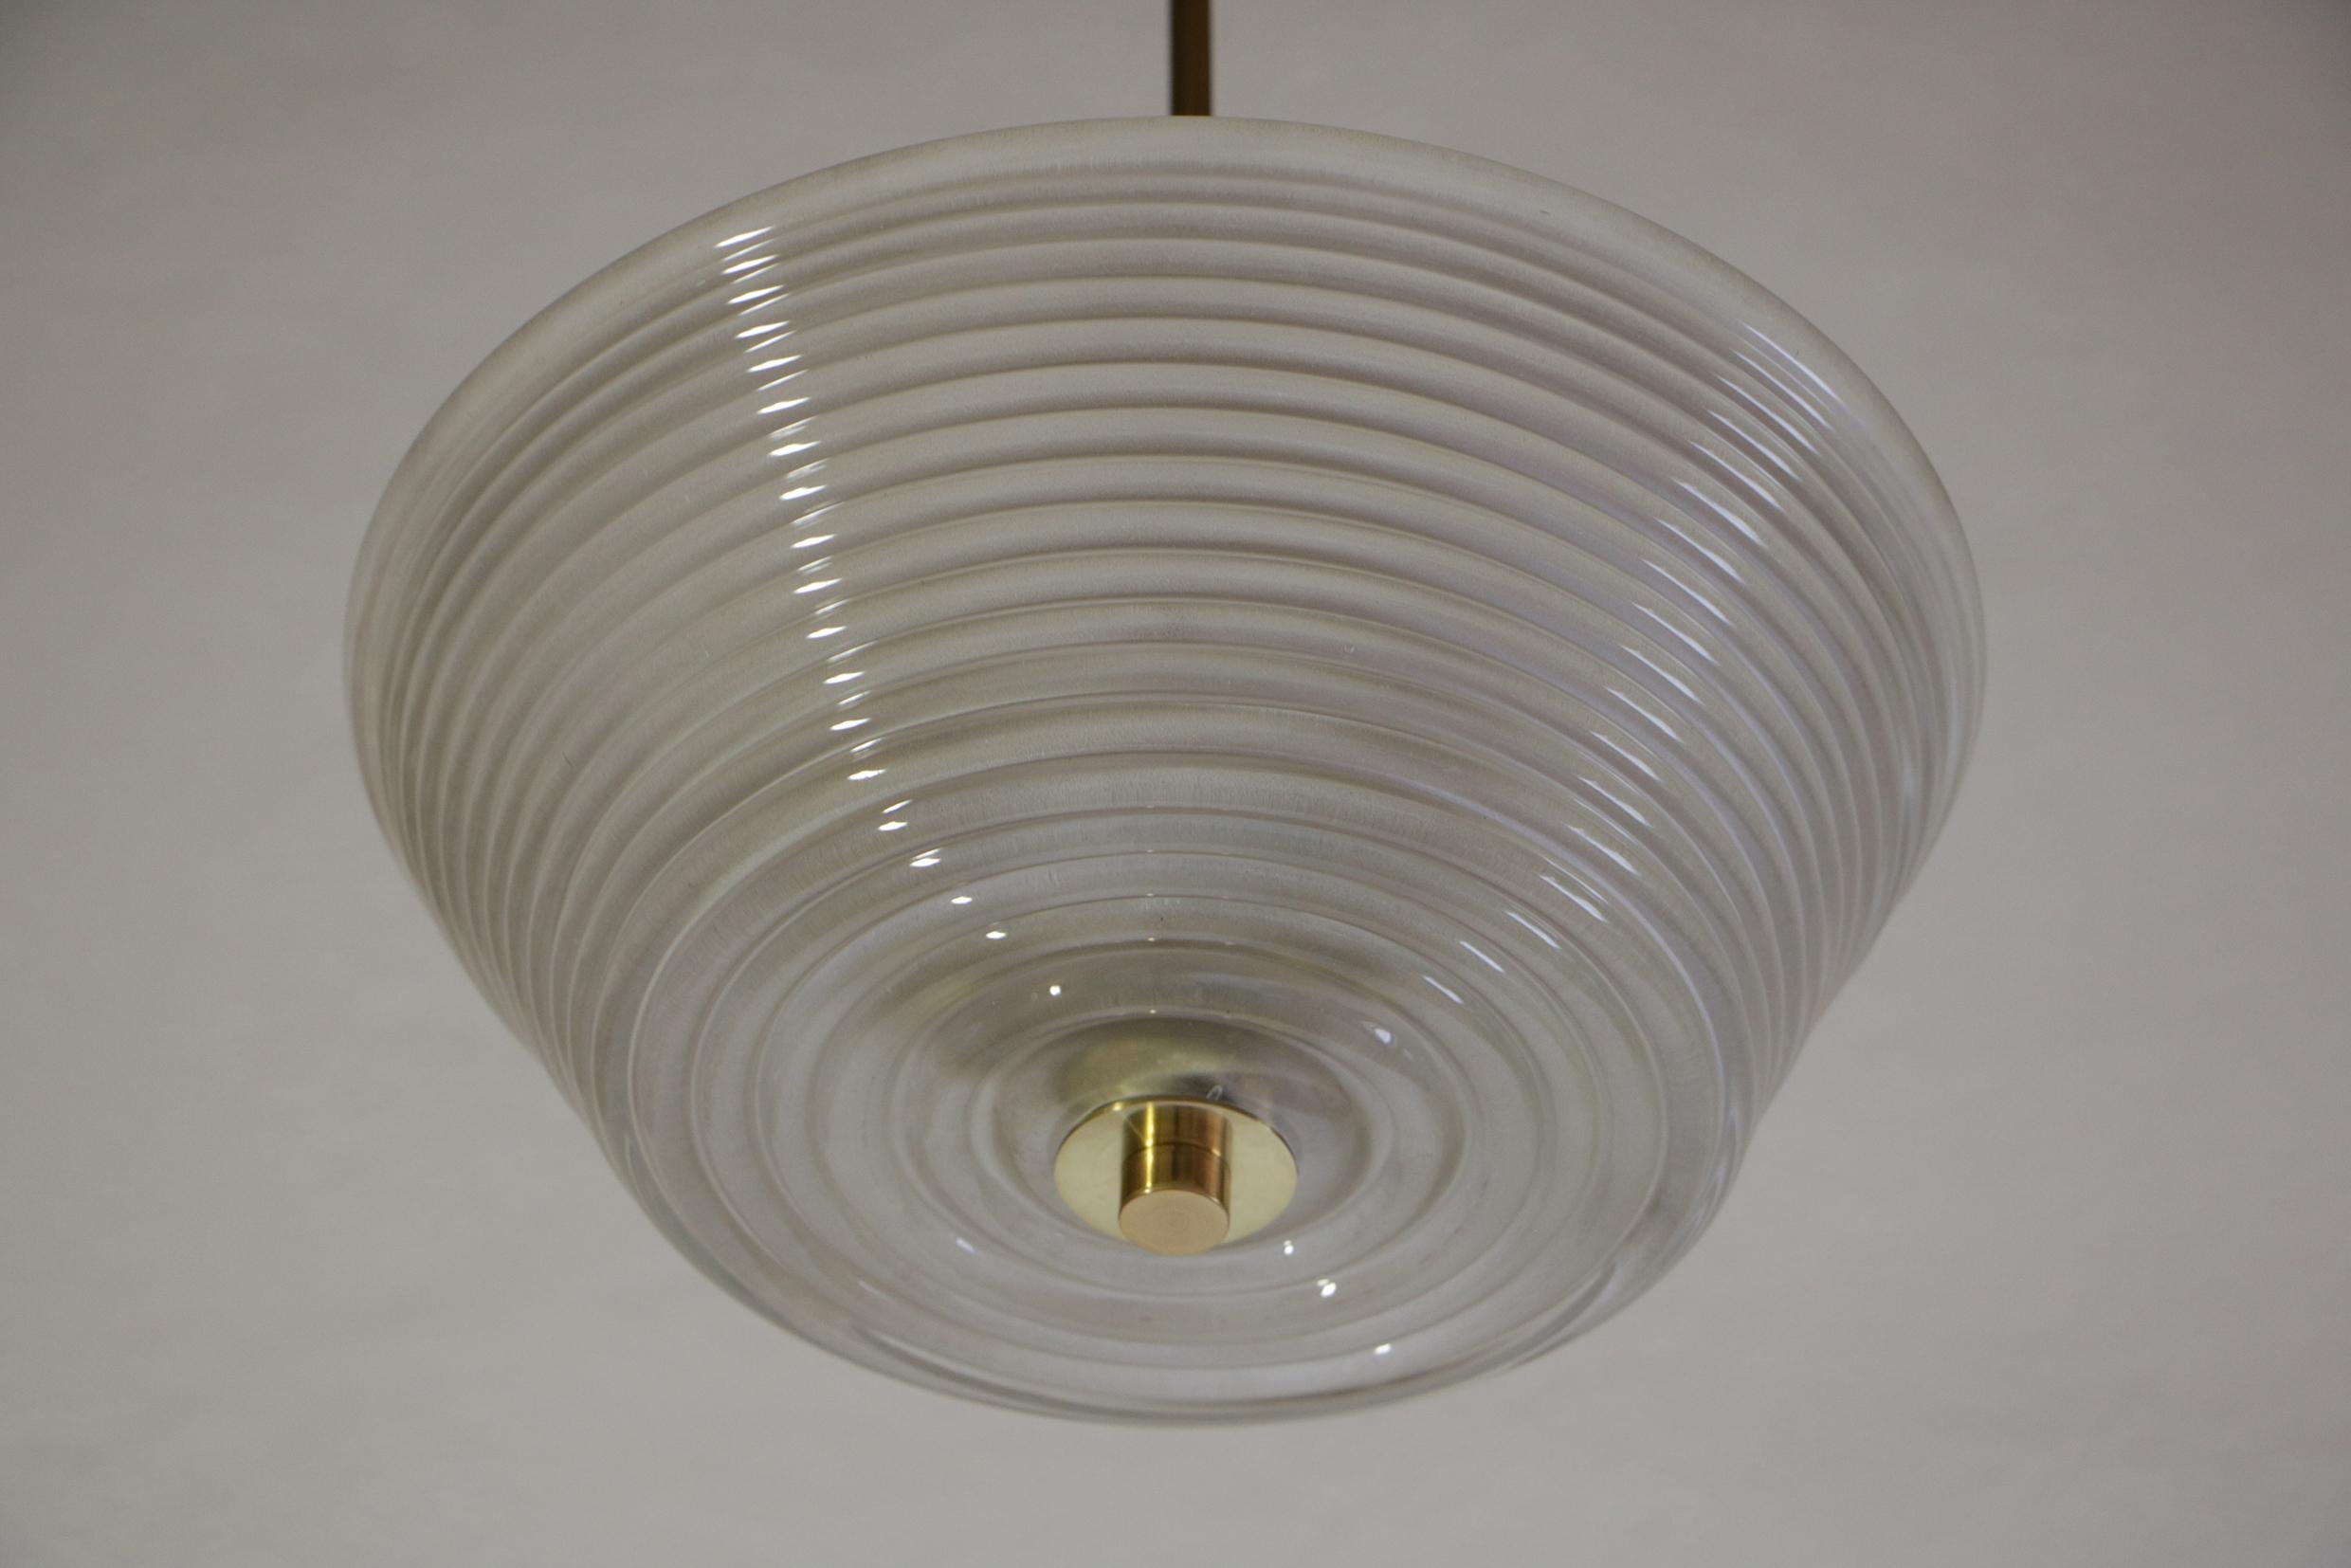 Italian Art Deco Murano Glass Chandelier Pendant Lamp by Barovier Toso, 1940s For Sale 1